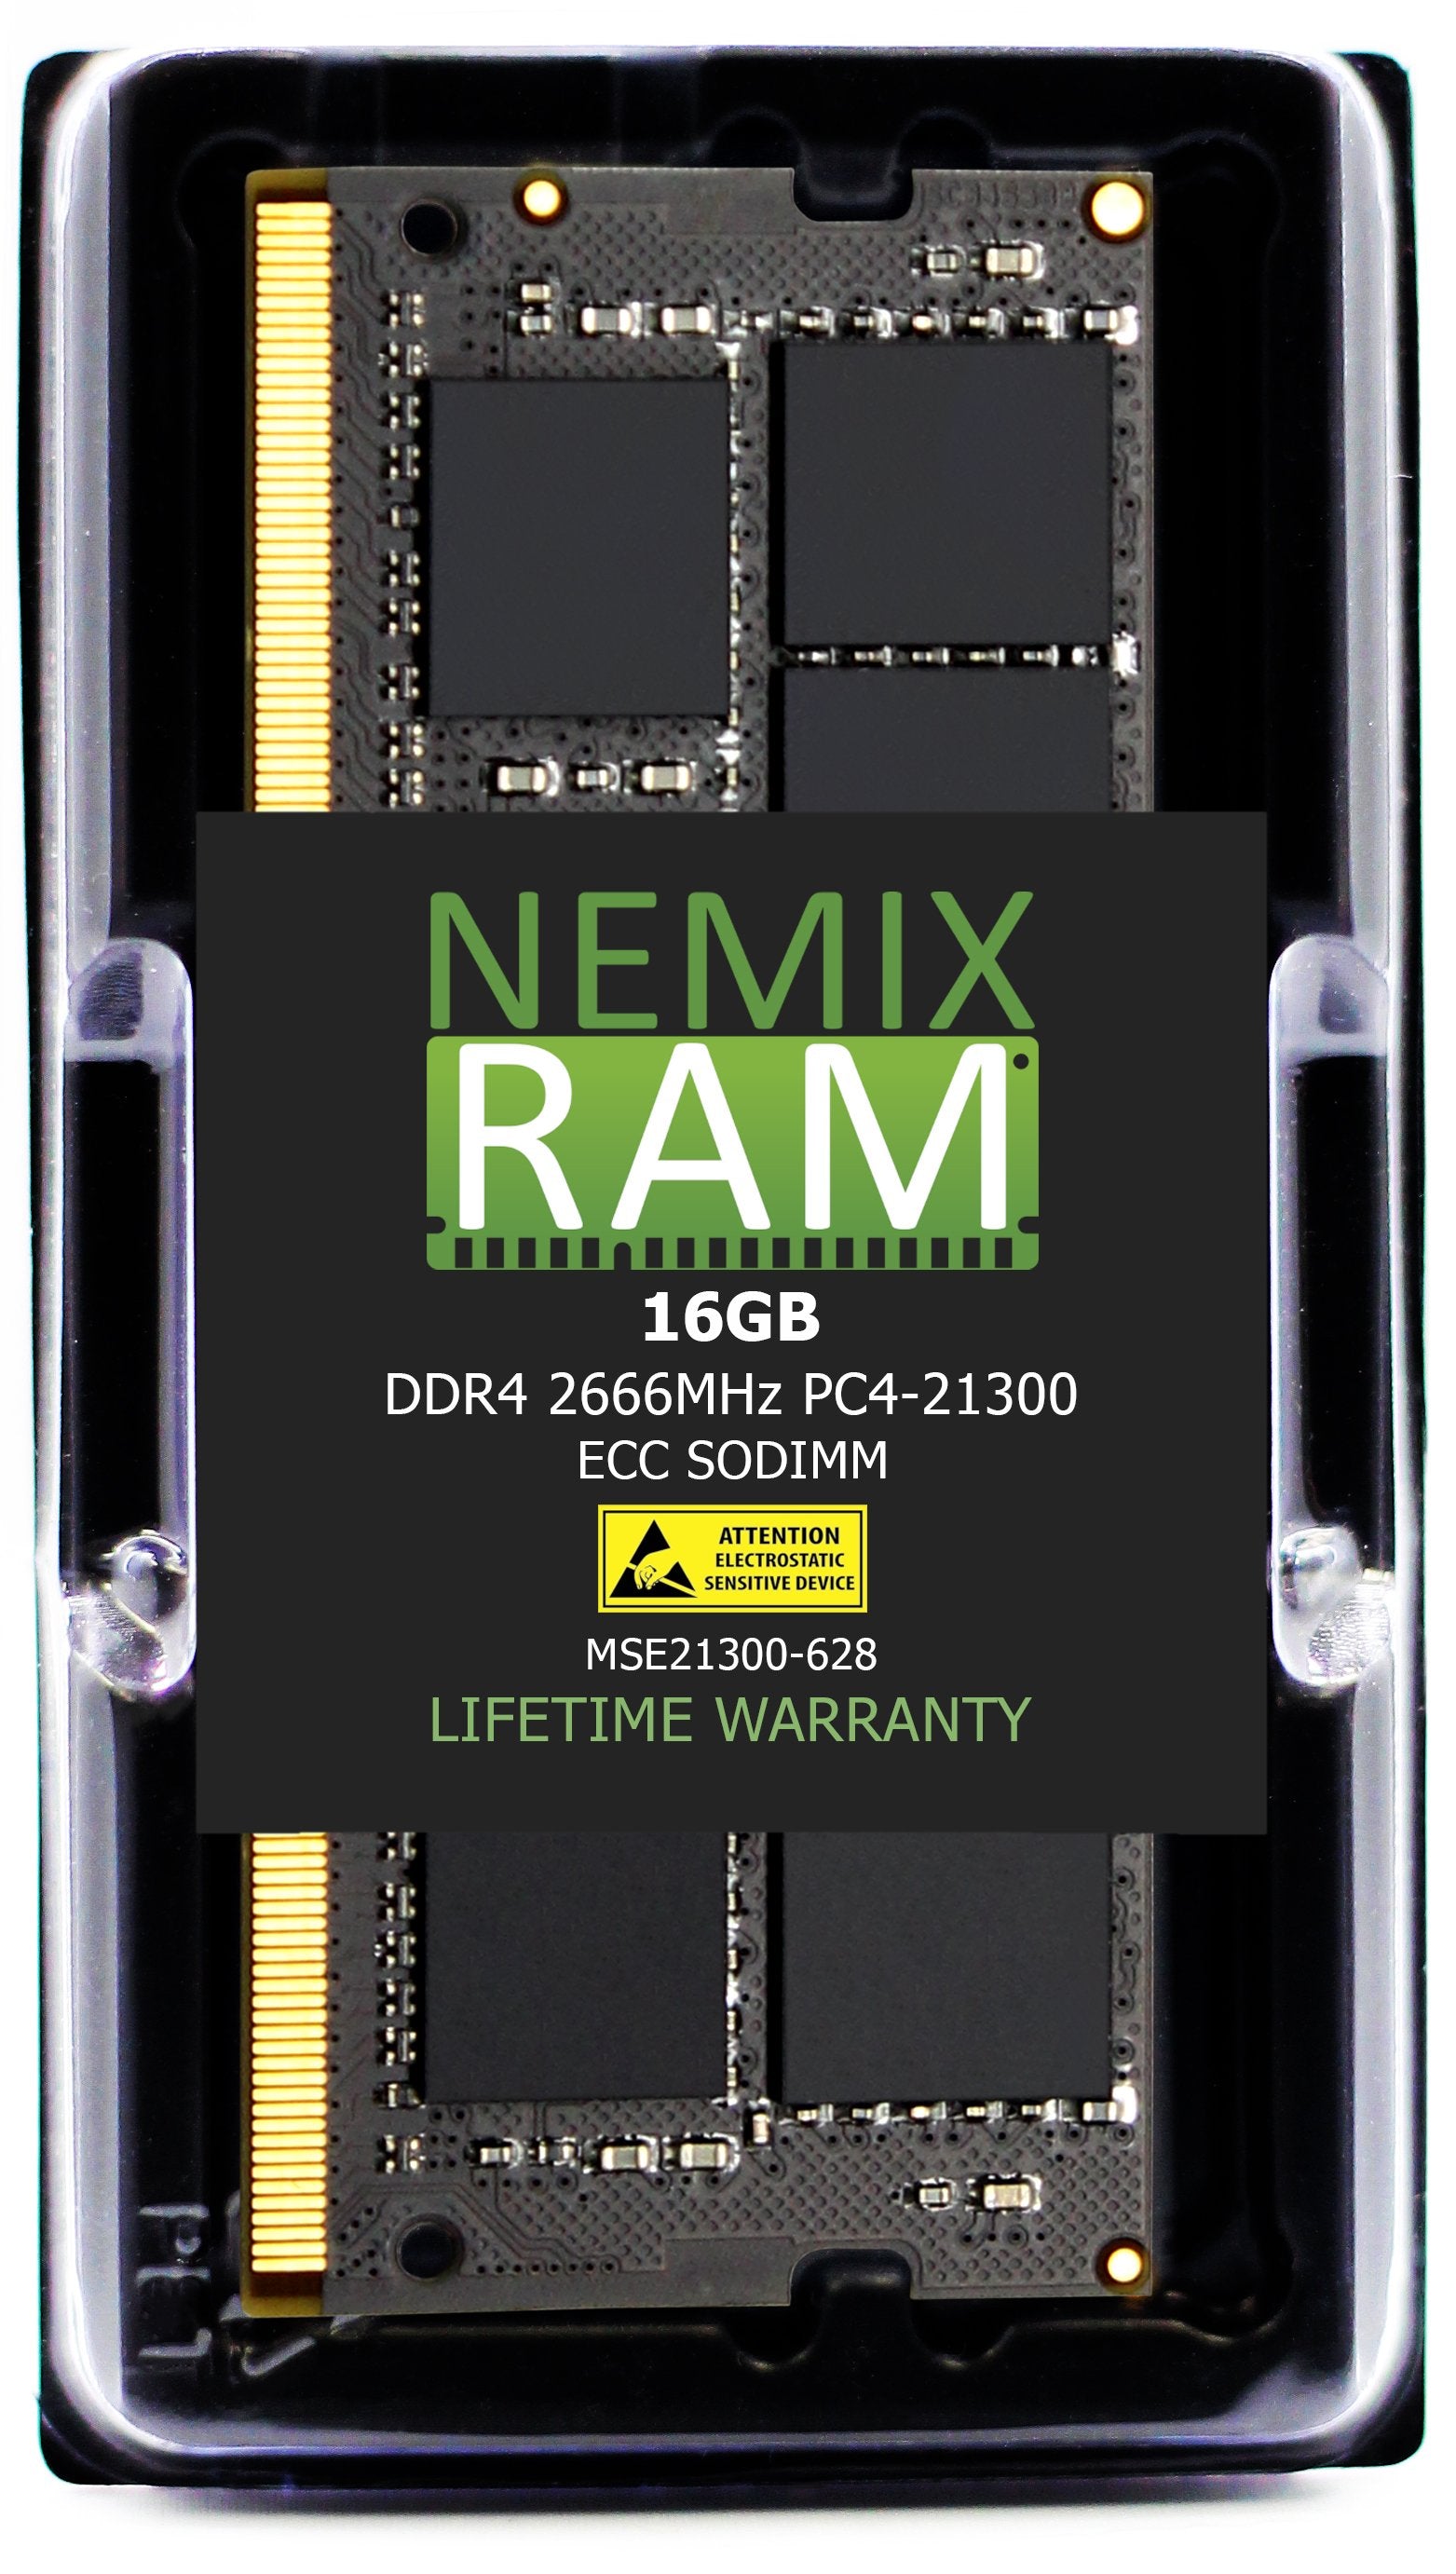 DDR4 2666MHZ PC4-21300 ECC SODIMM Compatible with Synology RackStation RS822+